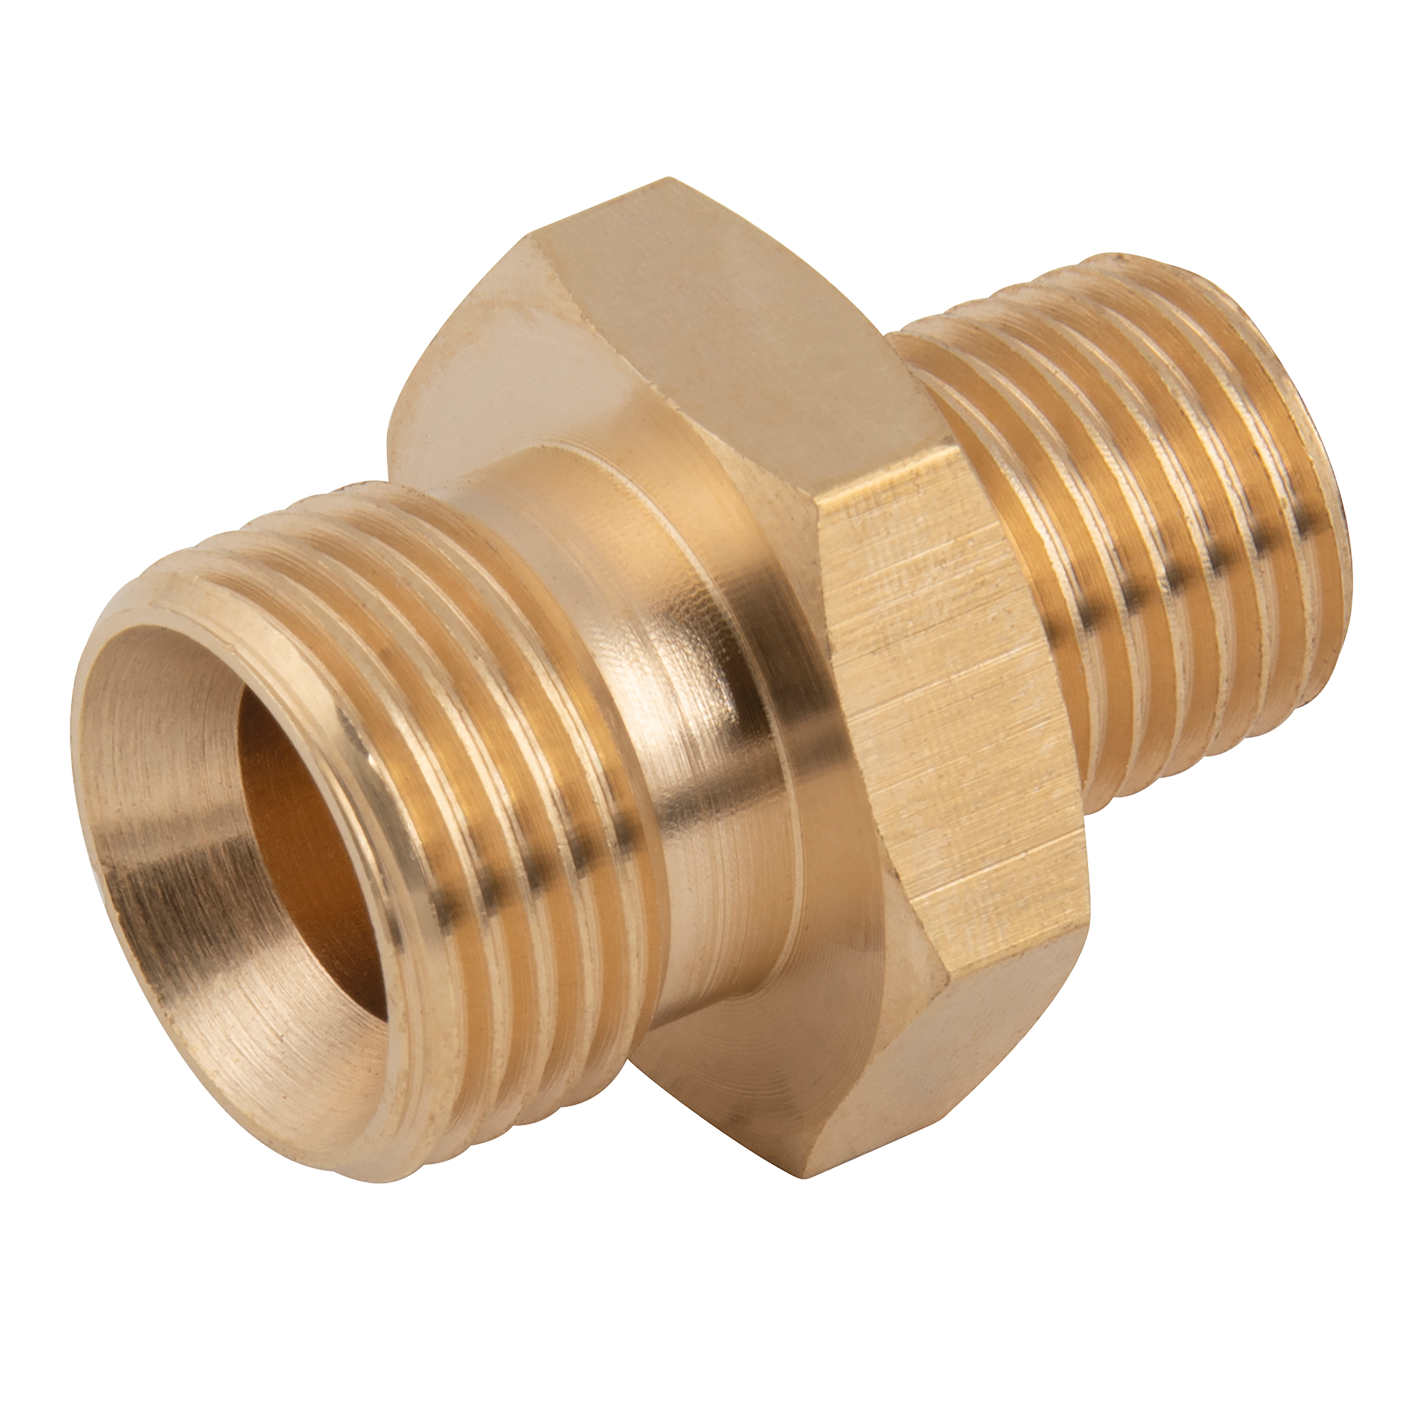 1/4" BSPP Male x 1/2" BSPT Male Unequal Adaptor